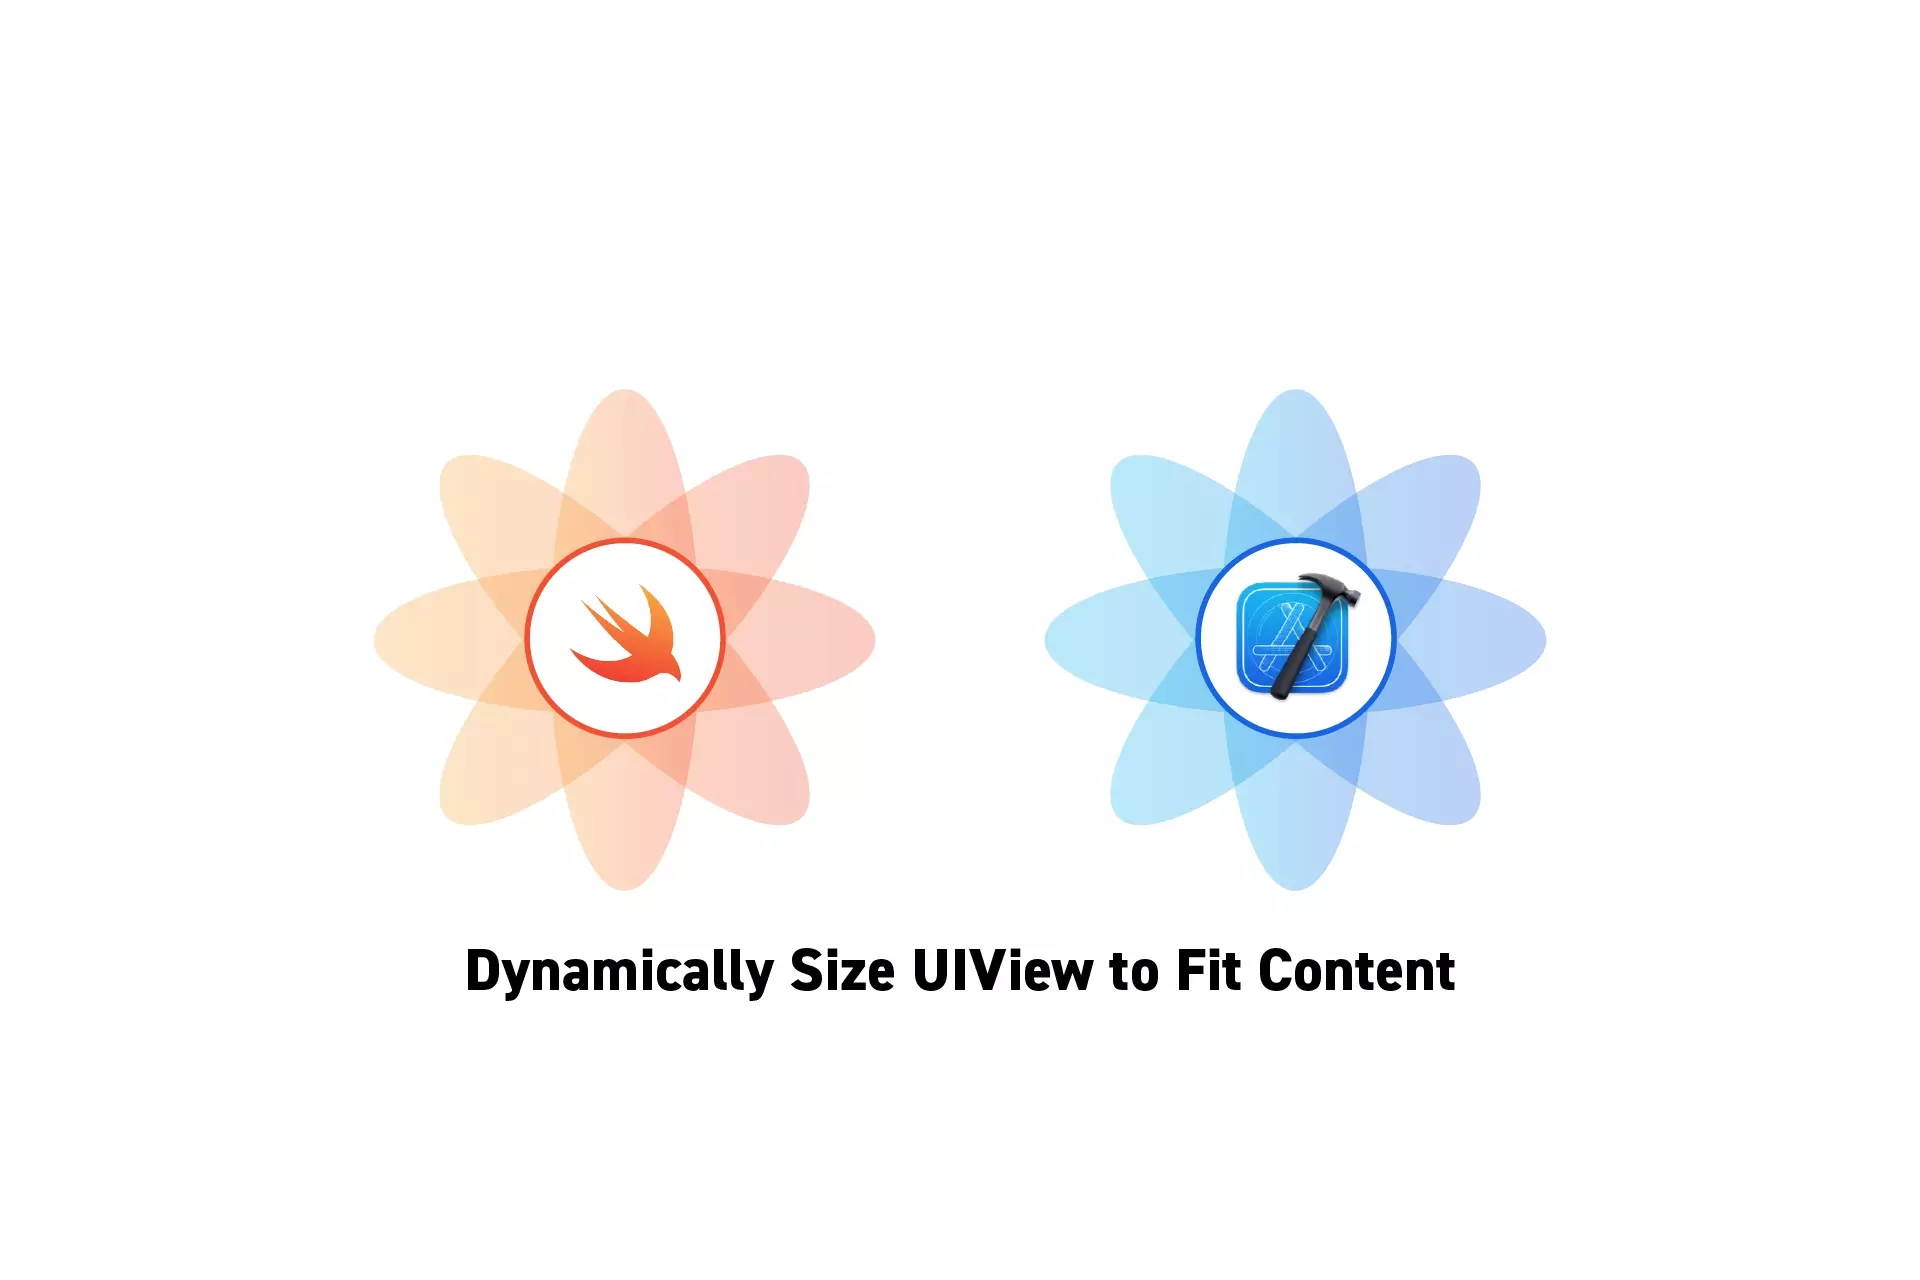 Two flowers that represent Swift and XCode with the text "Dynamically Size UIView to Fit Content" beneath them.